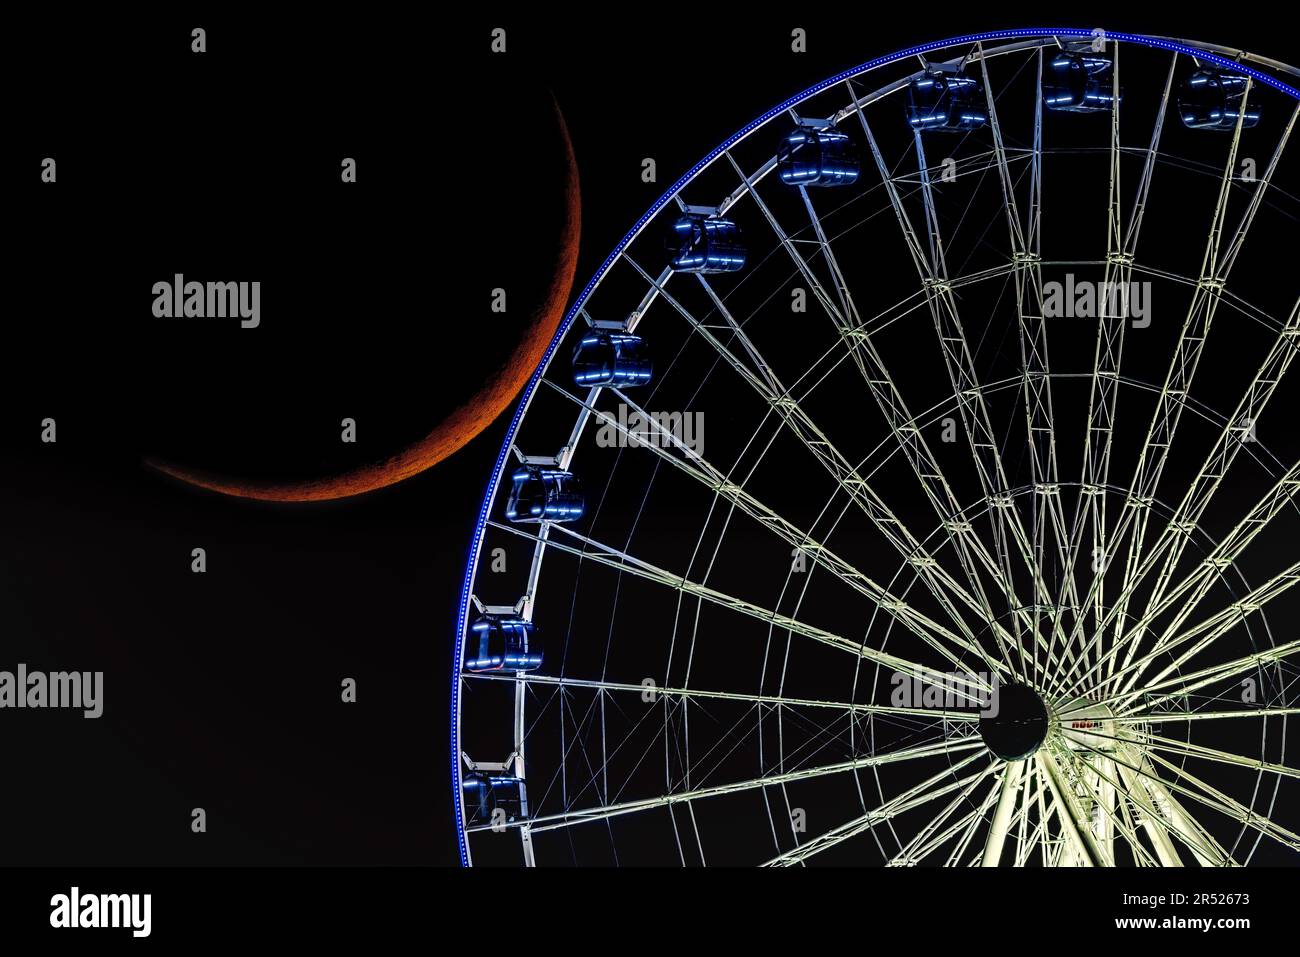 Crescent Moon - The Crescent Moon sets and it is seen by the illuminated Dream Wheel ferris wheel at American Dream mall in Rutherford, New Jersey. Stock Photo